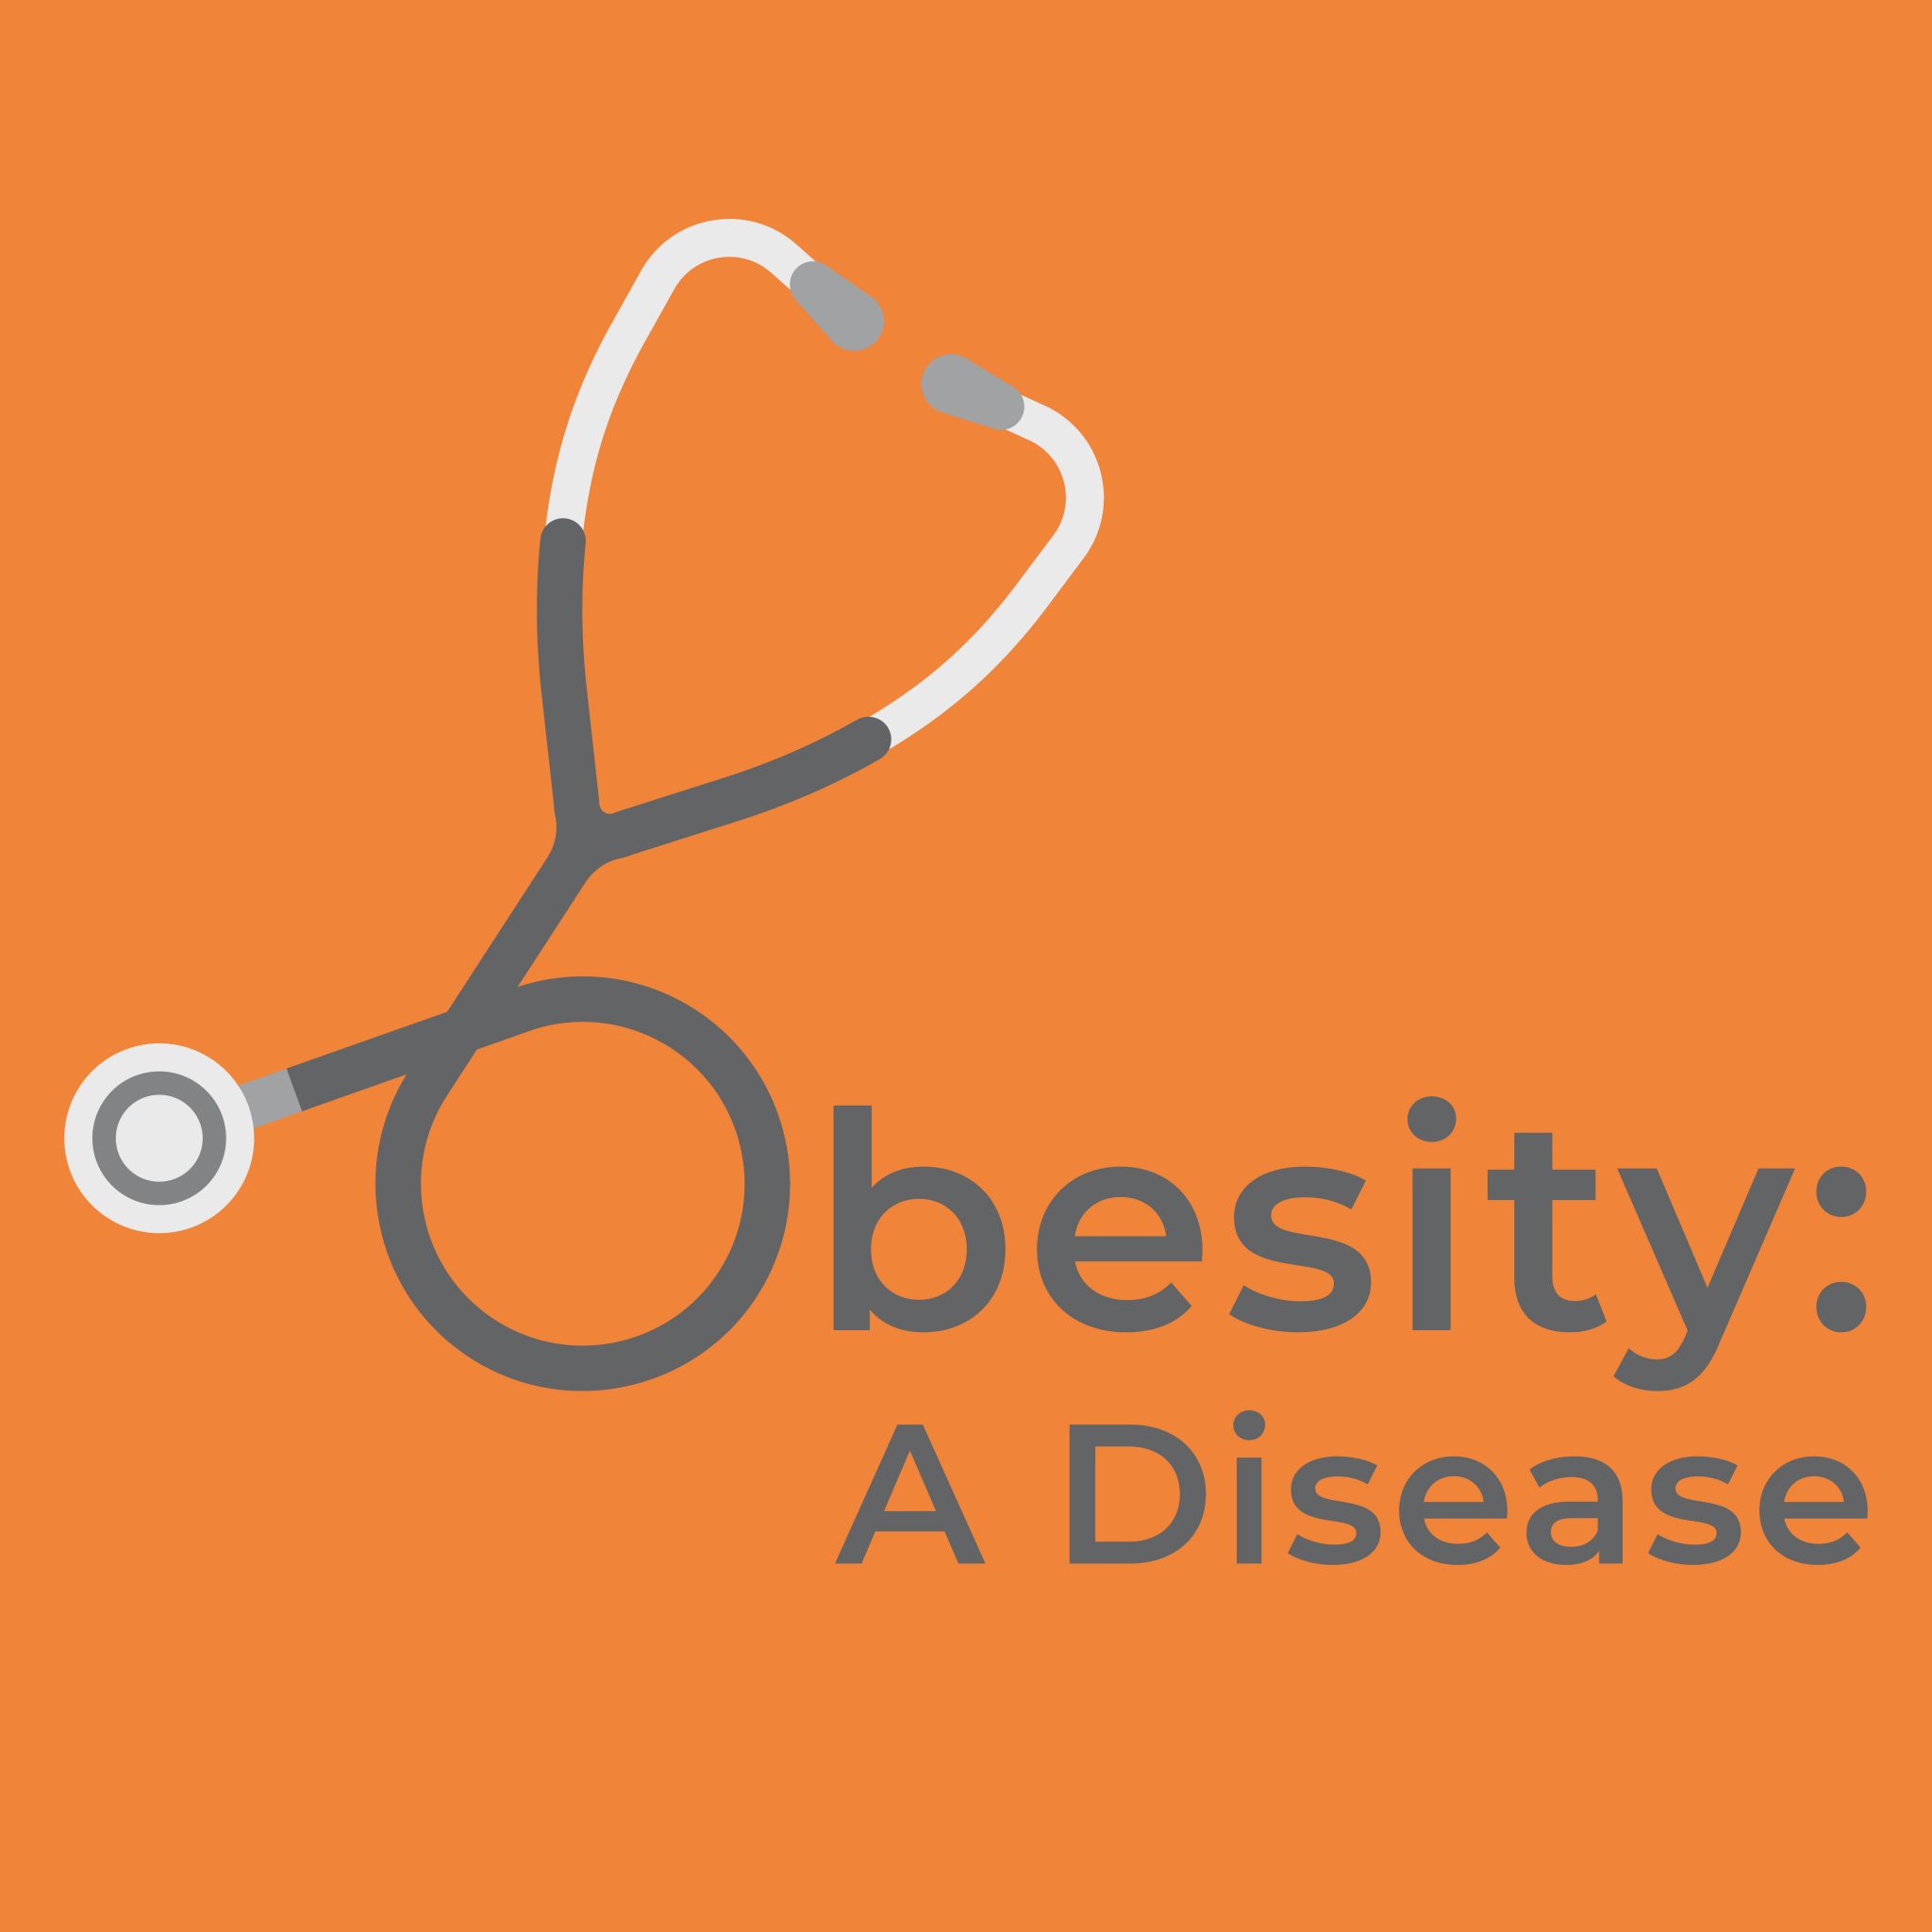 Episode 70: Article Reviews: Clinical Practice Statements for the Management of Obesity - Cancer and Obesity; Part 1 of 2